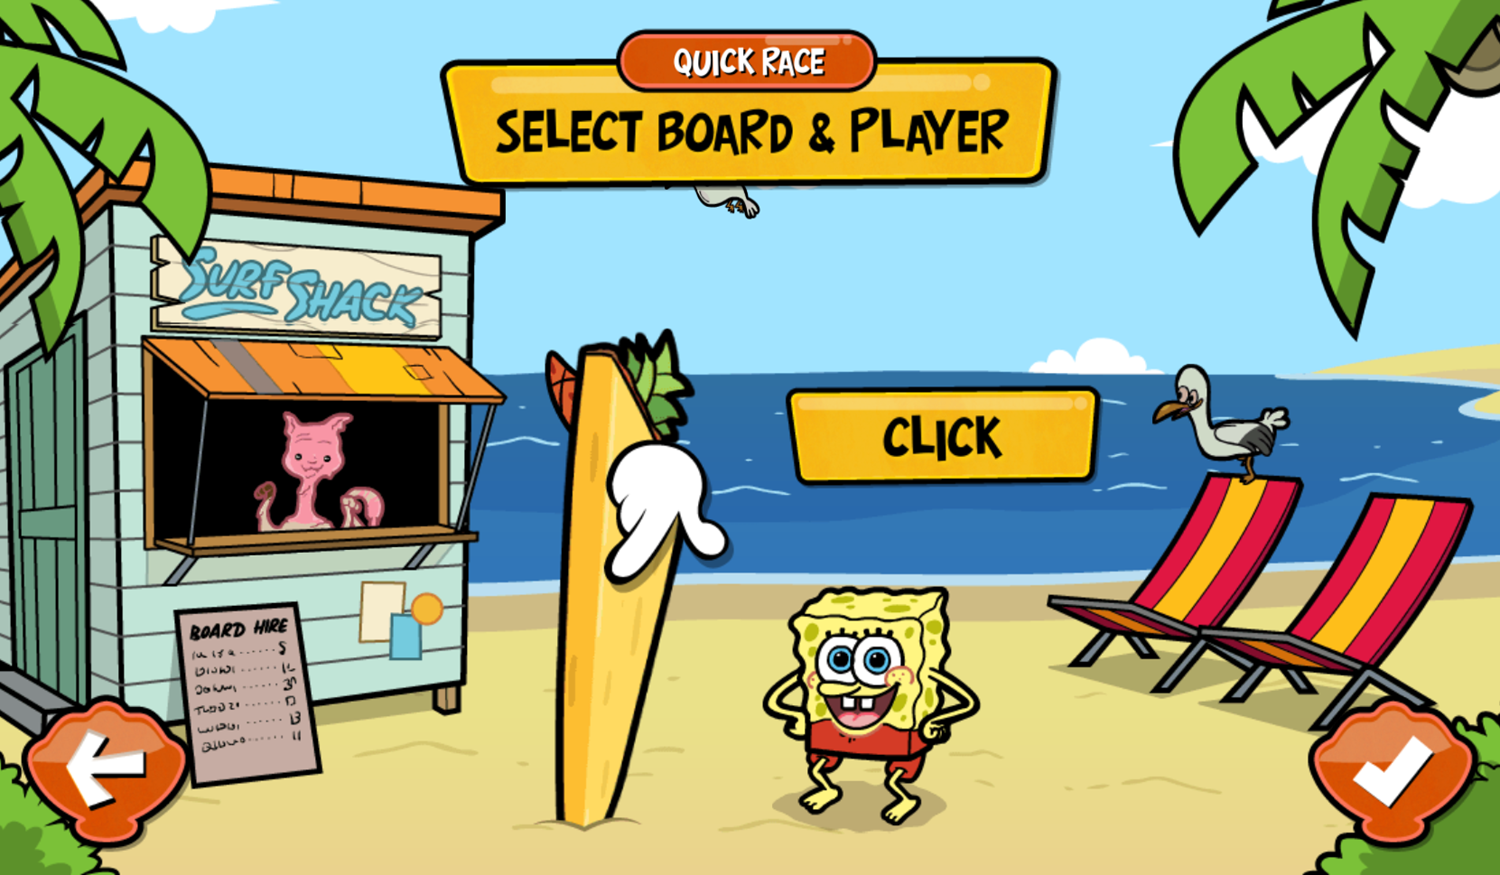 Nick Surfs Up Board and Player Screenshot.